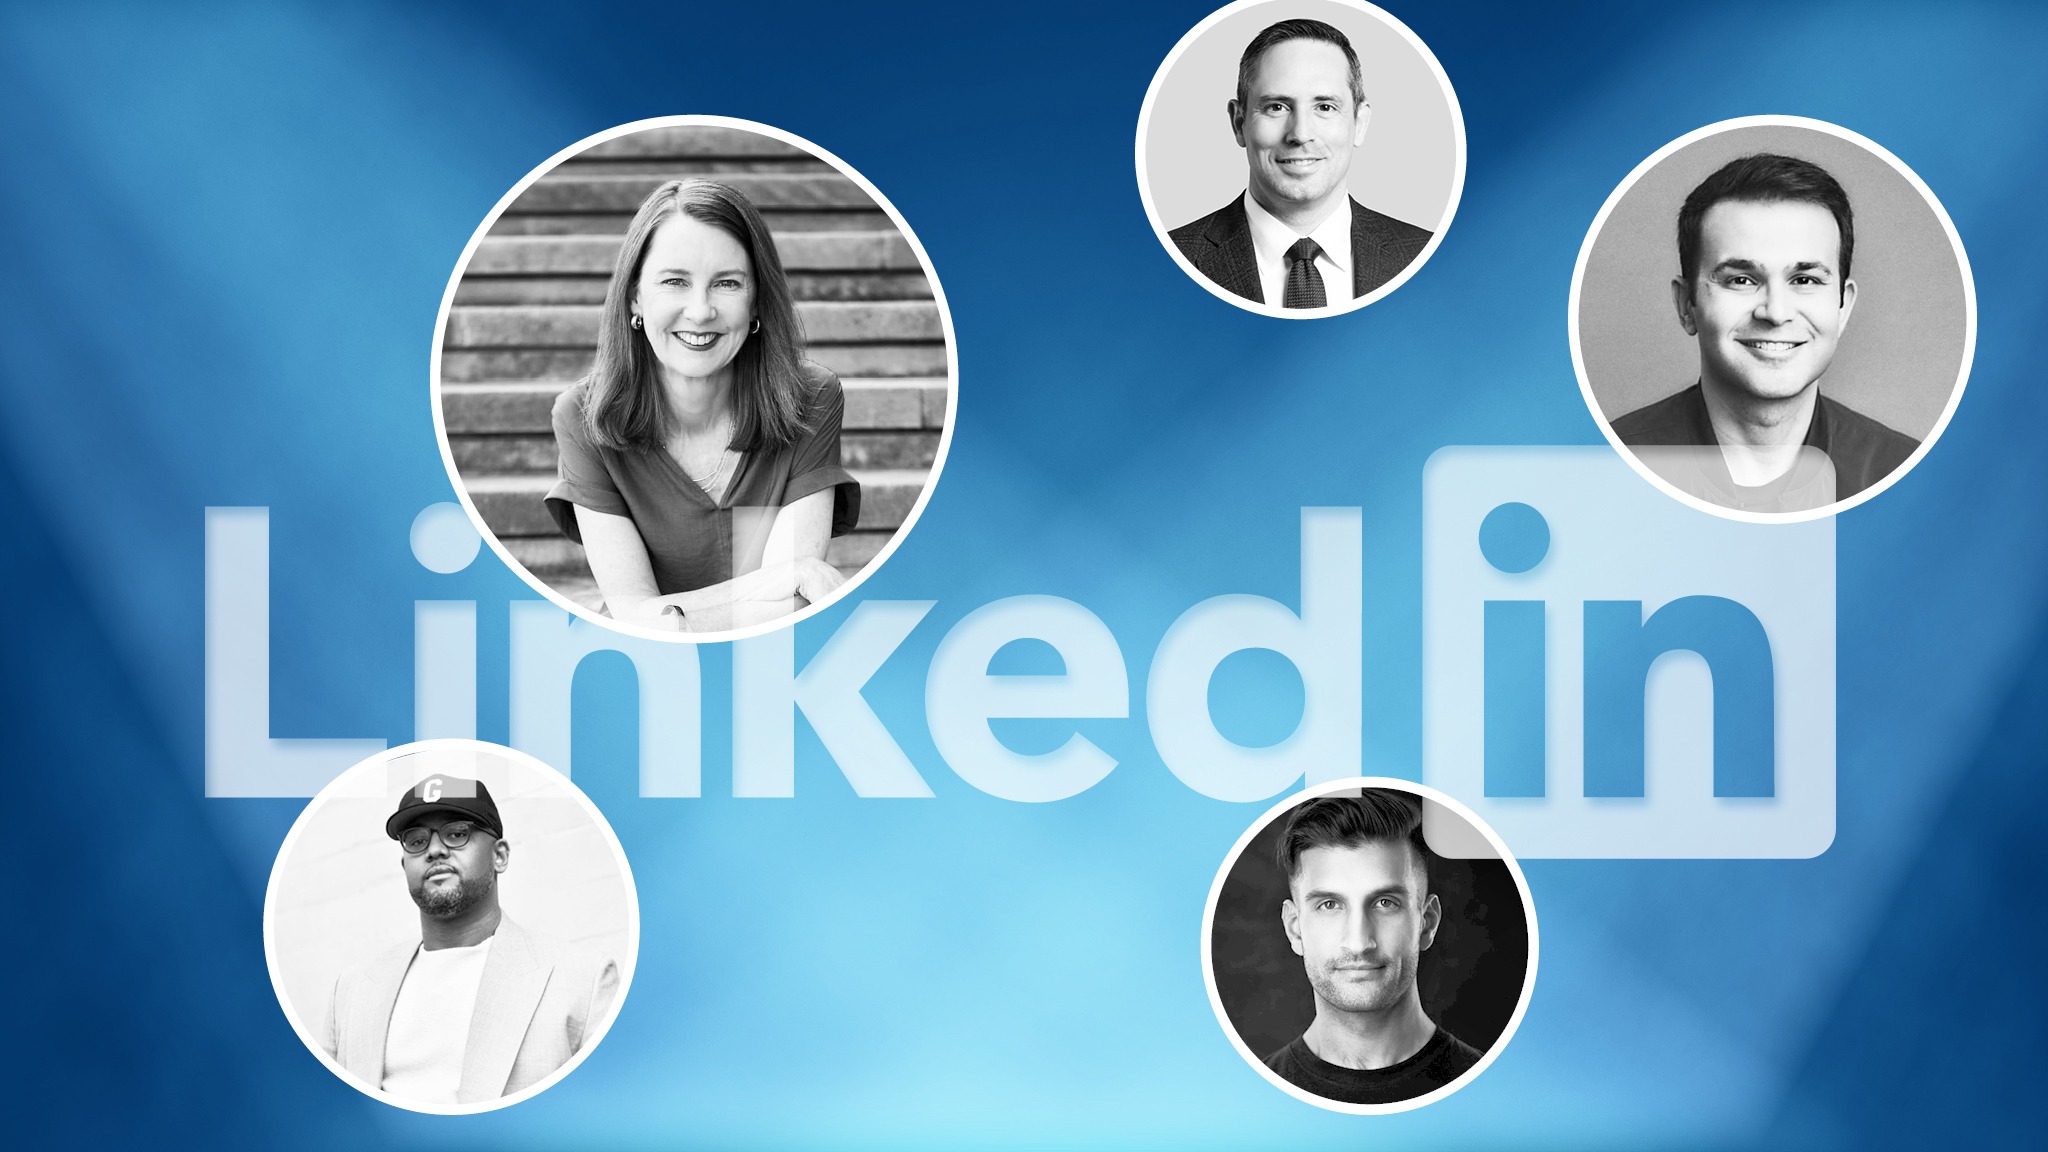 Influencers and CEOs take their brands to LinkedIn